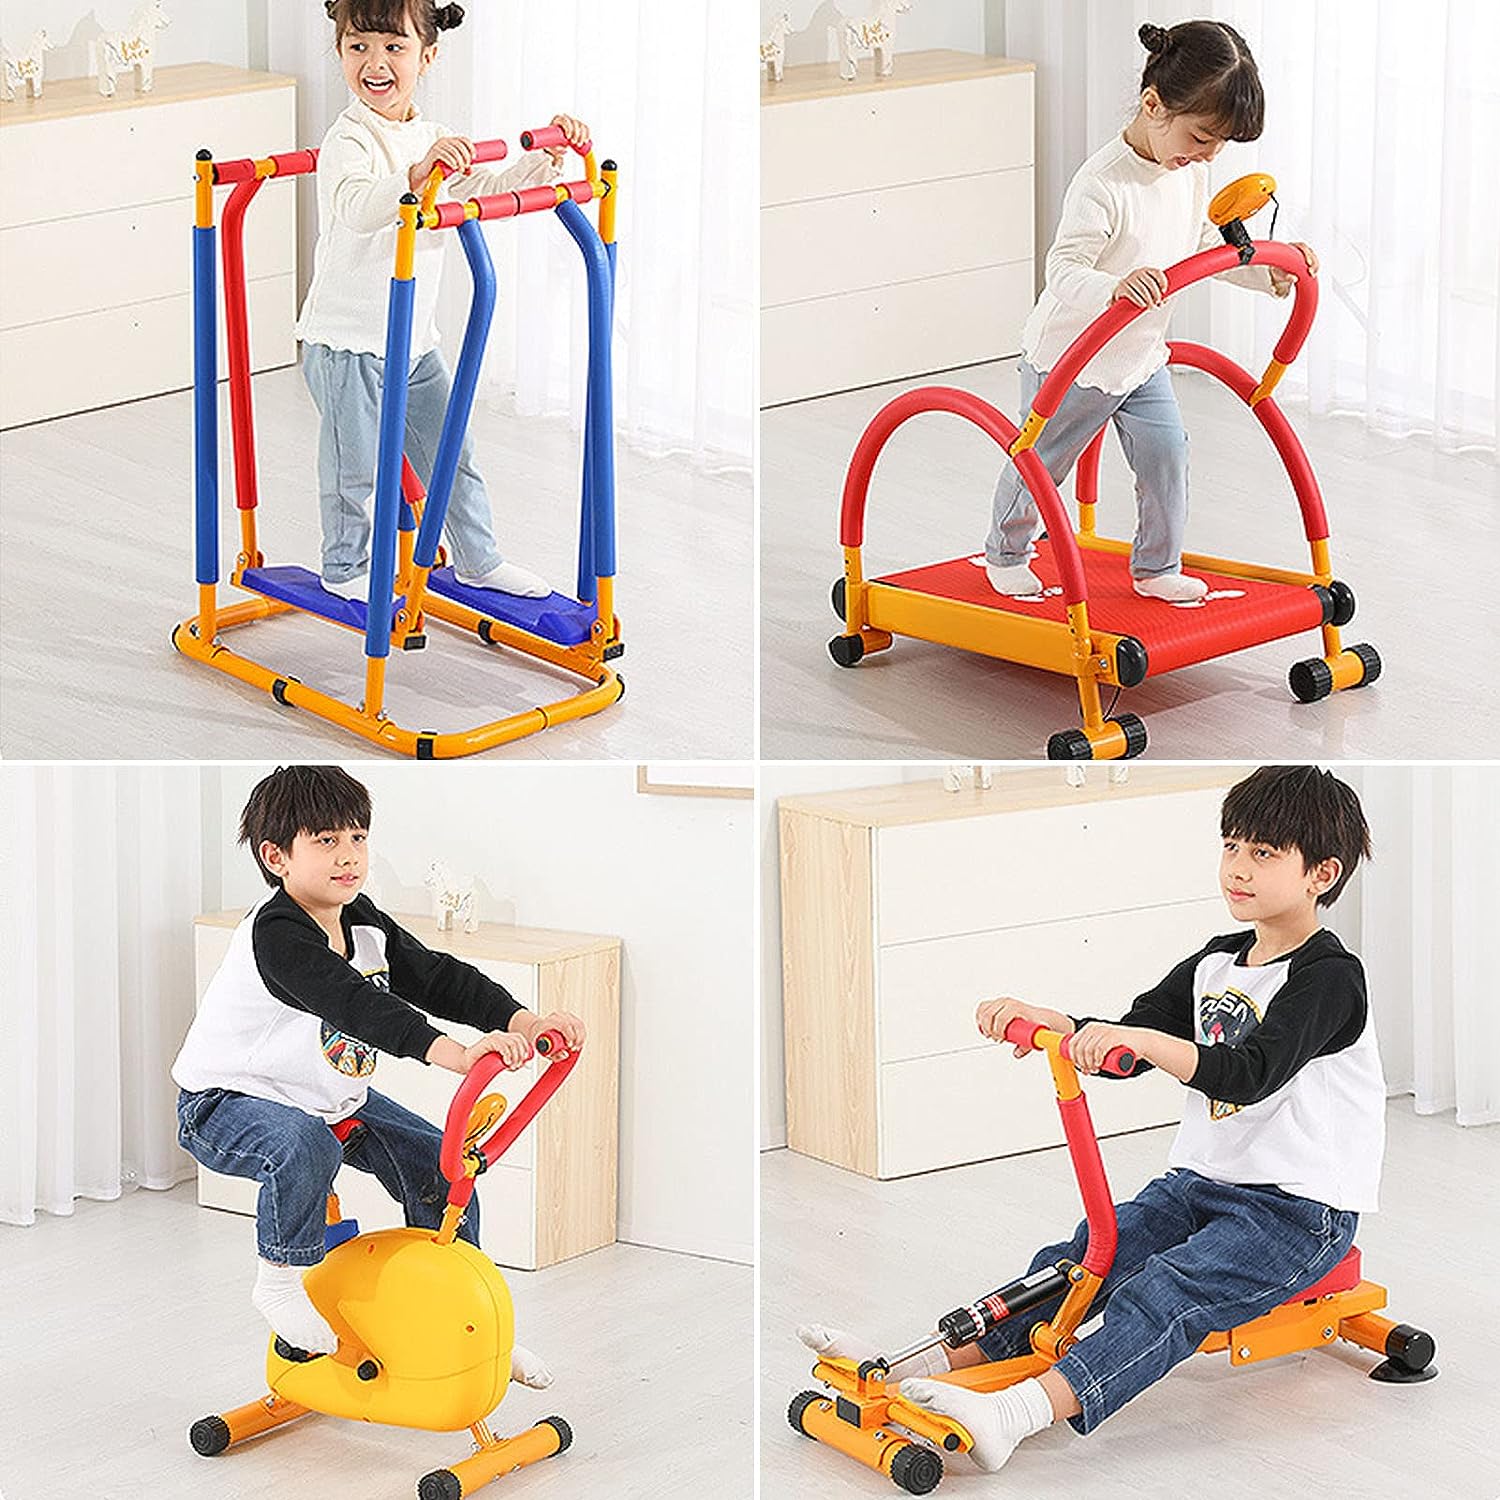 kids fitness exercise equipment review